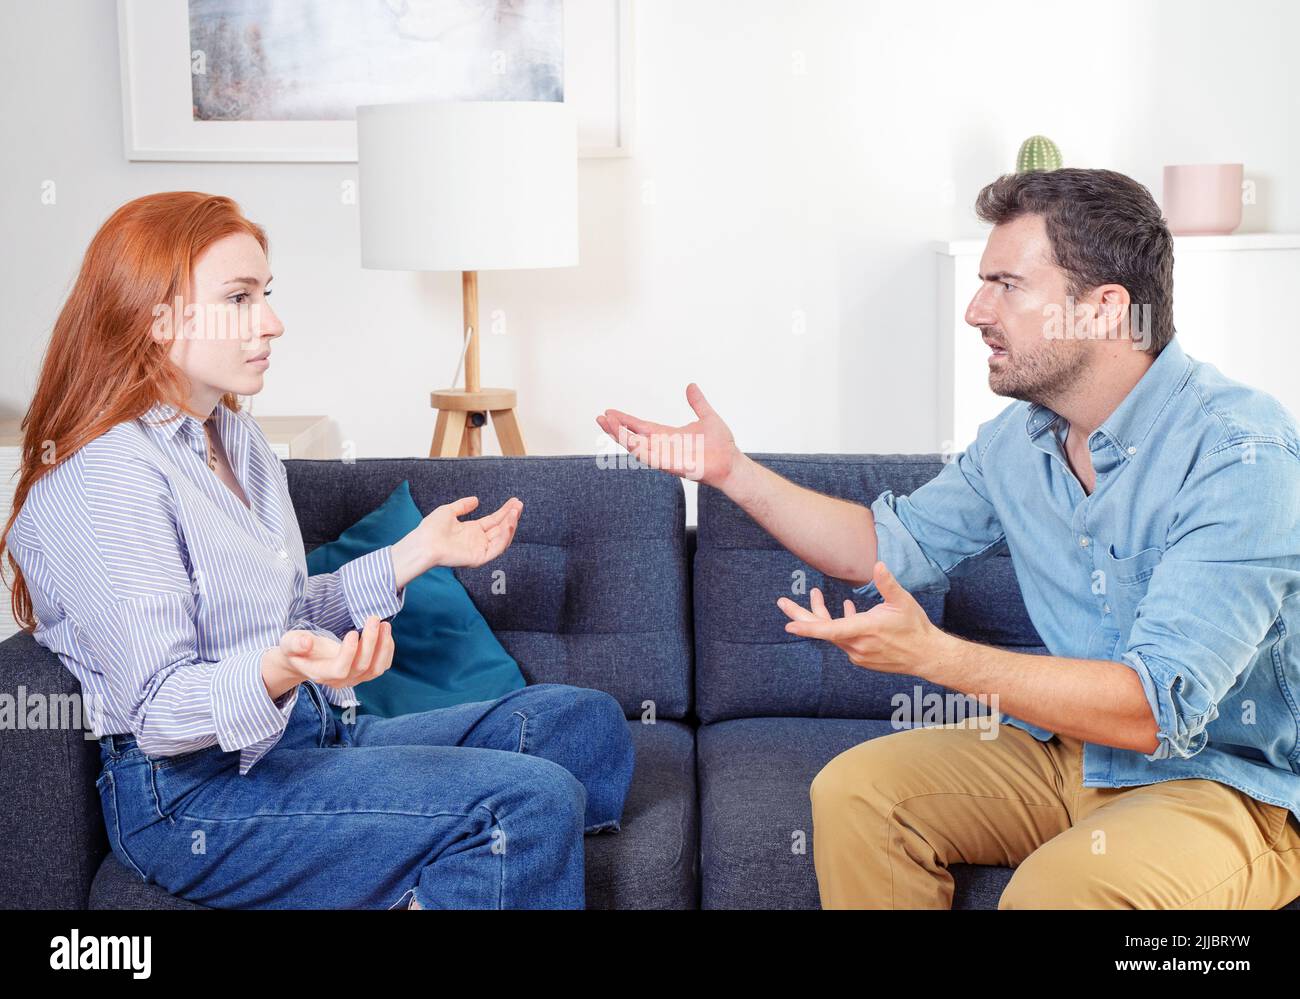 Angry couple arguing and difficulties in relationship Stock Photo